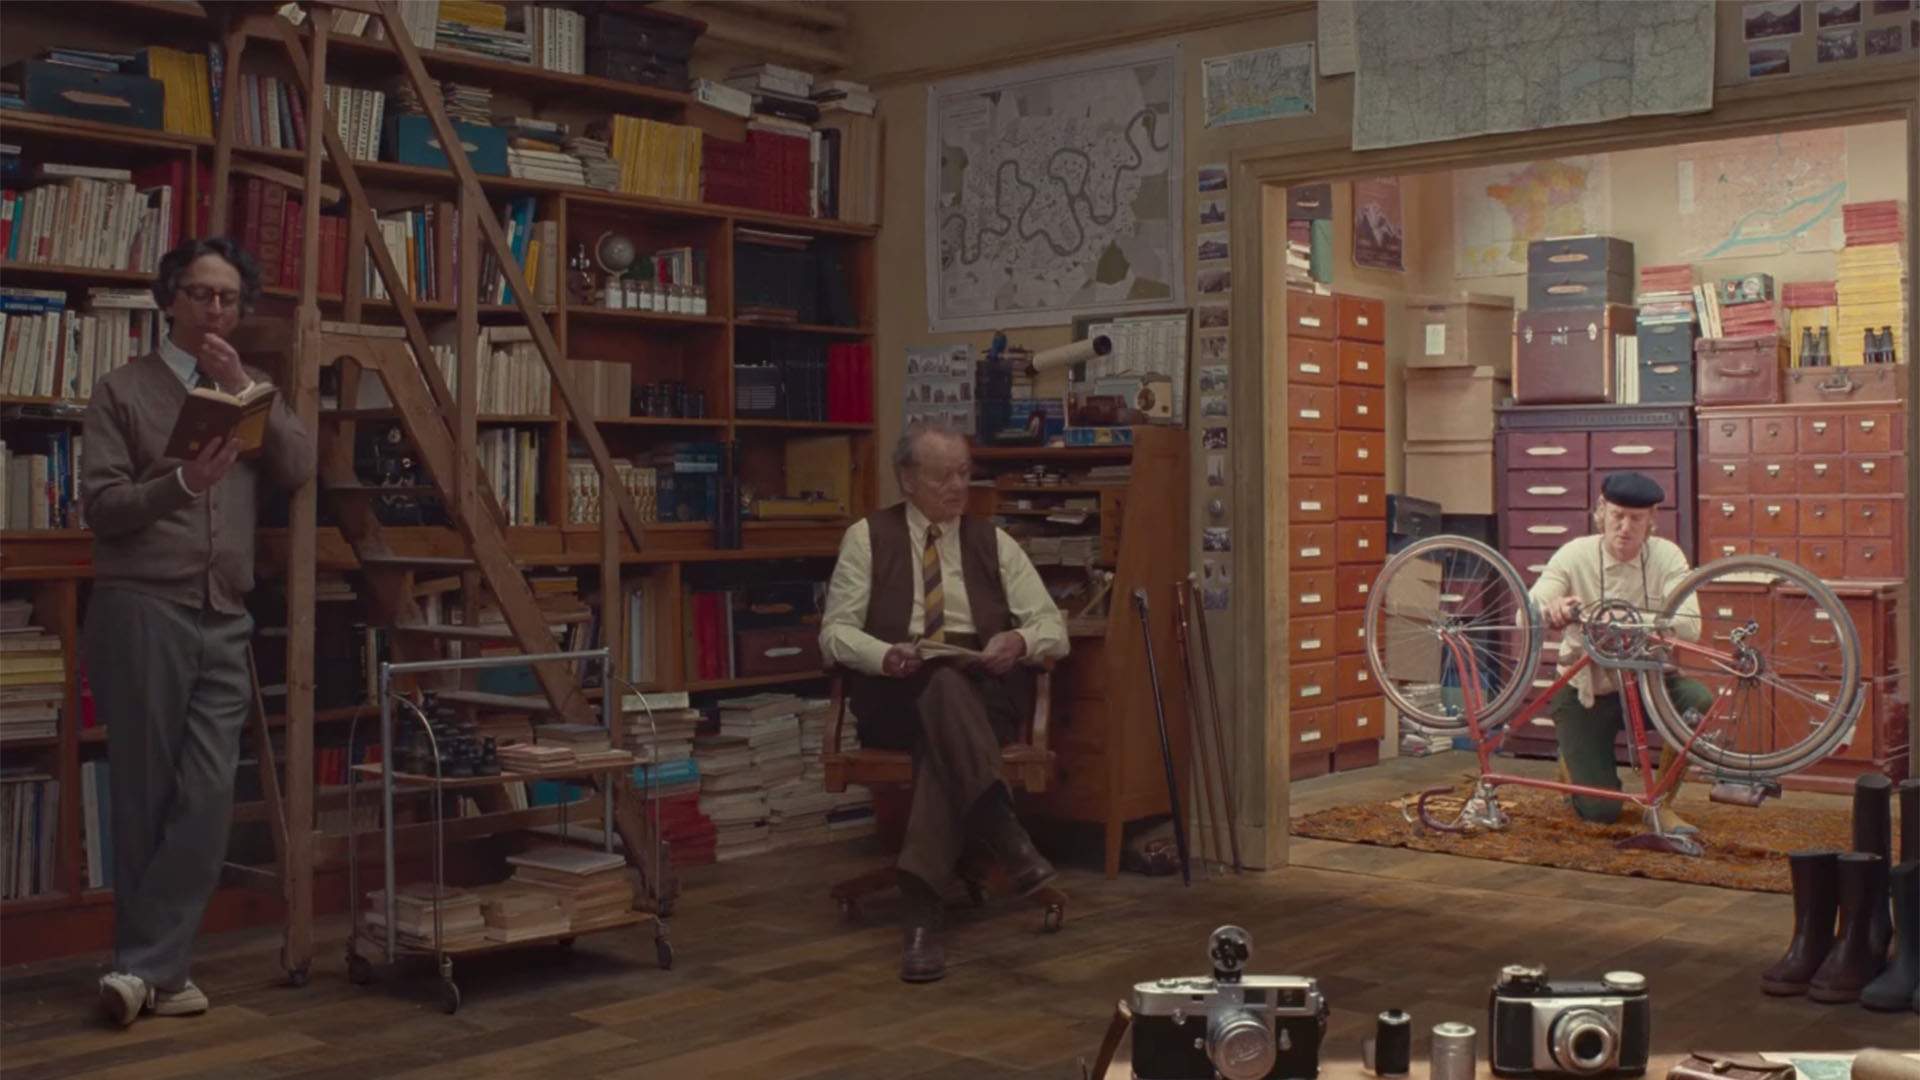 The First Trailer for Wes Anderson's 'The French Dispatch' Is Here and It's Very Wes Anderson